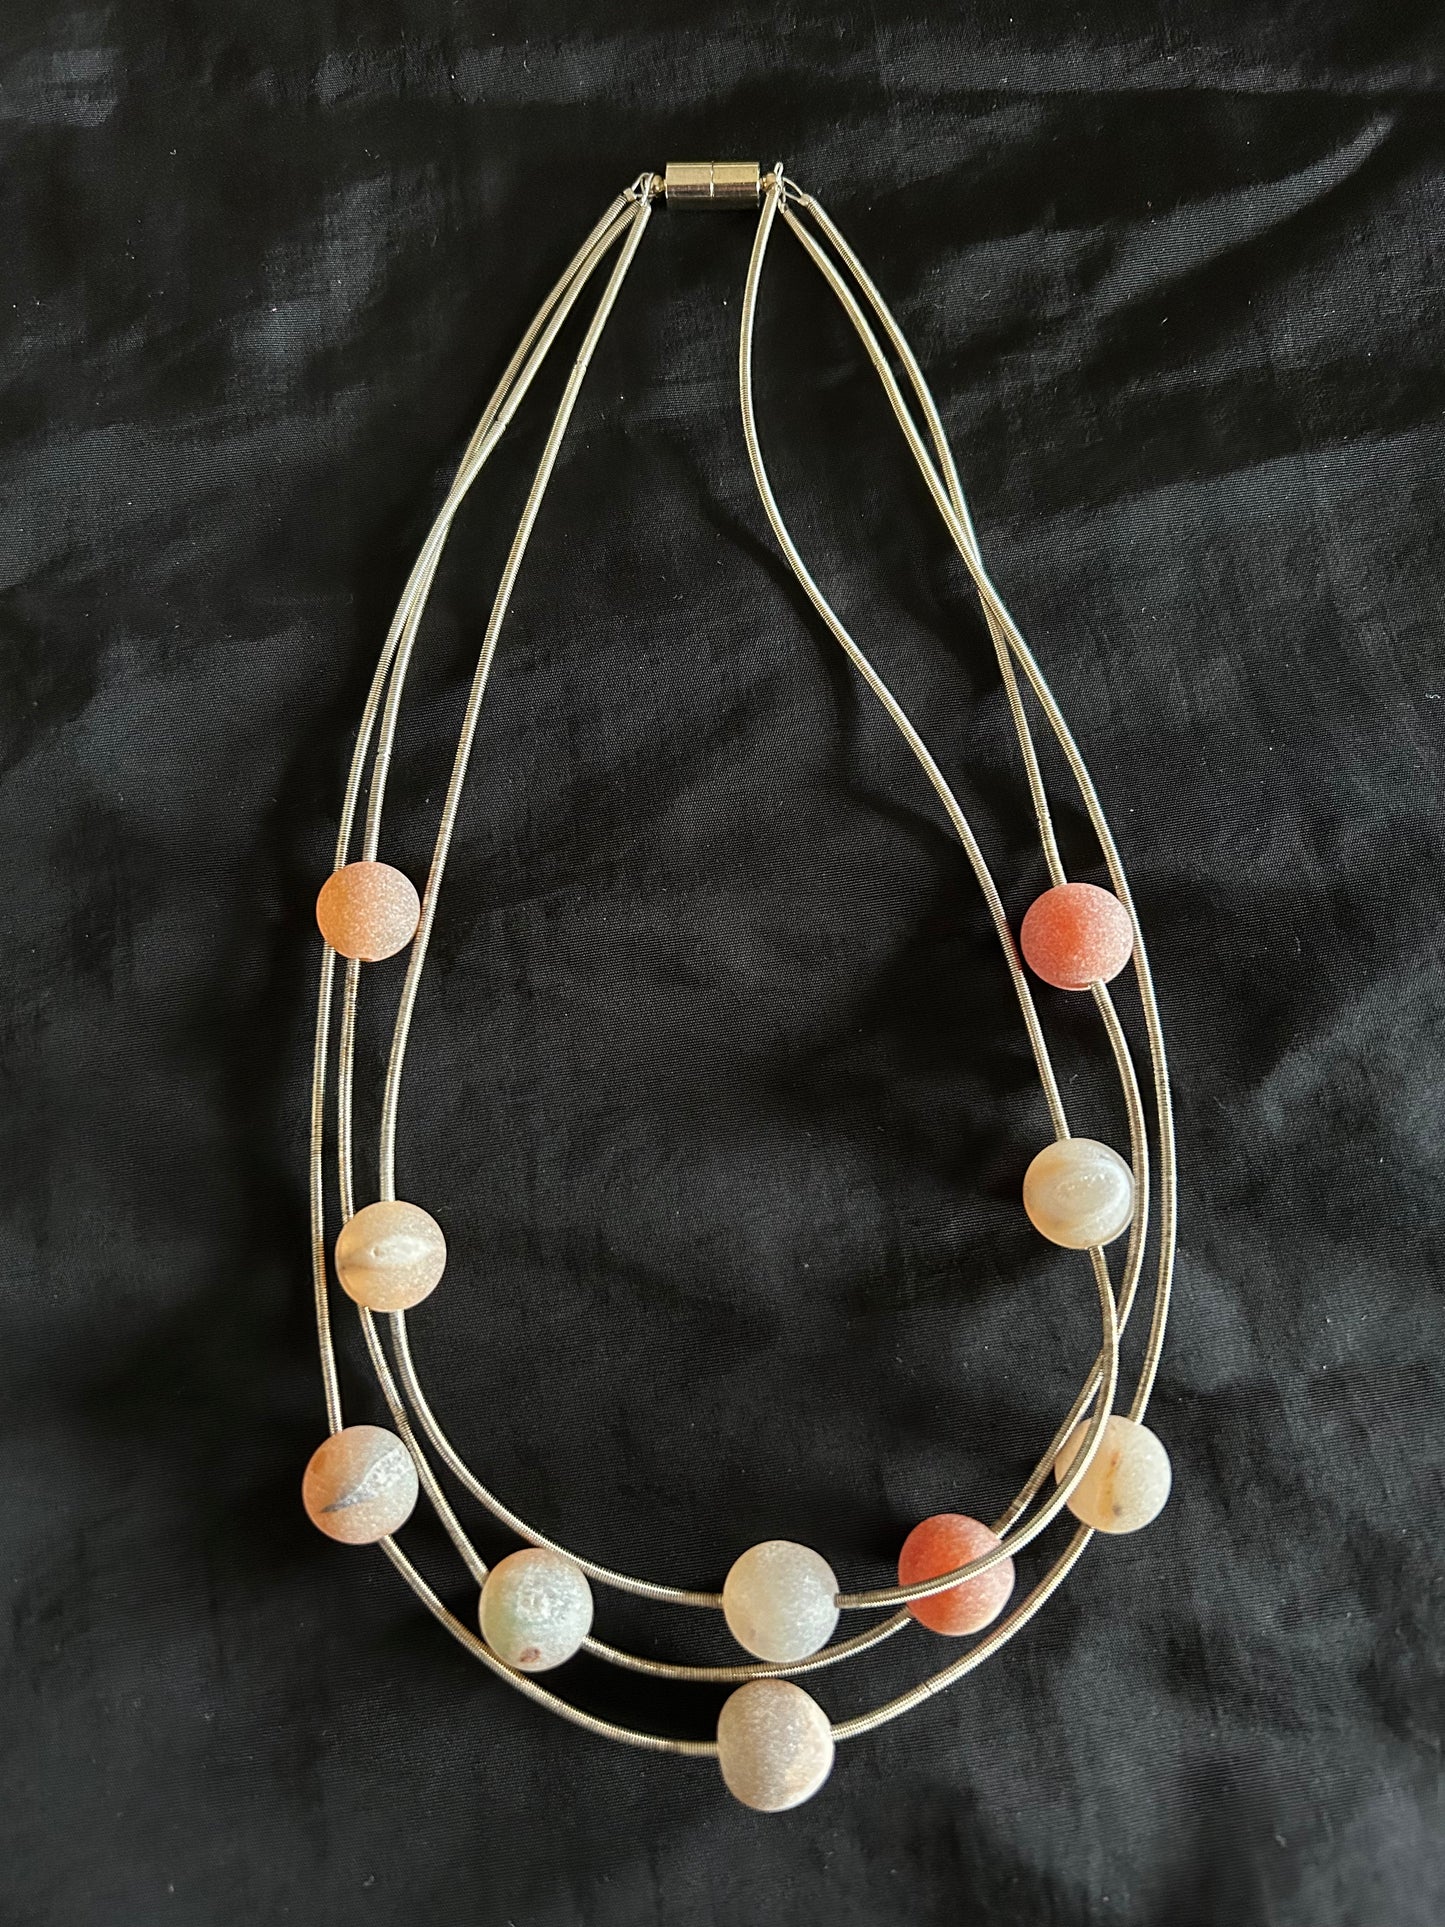 SL- Gray Corded Necklace with Peach Accents